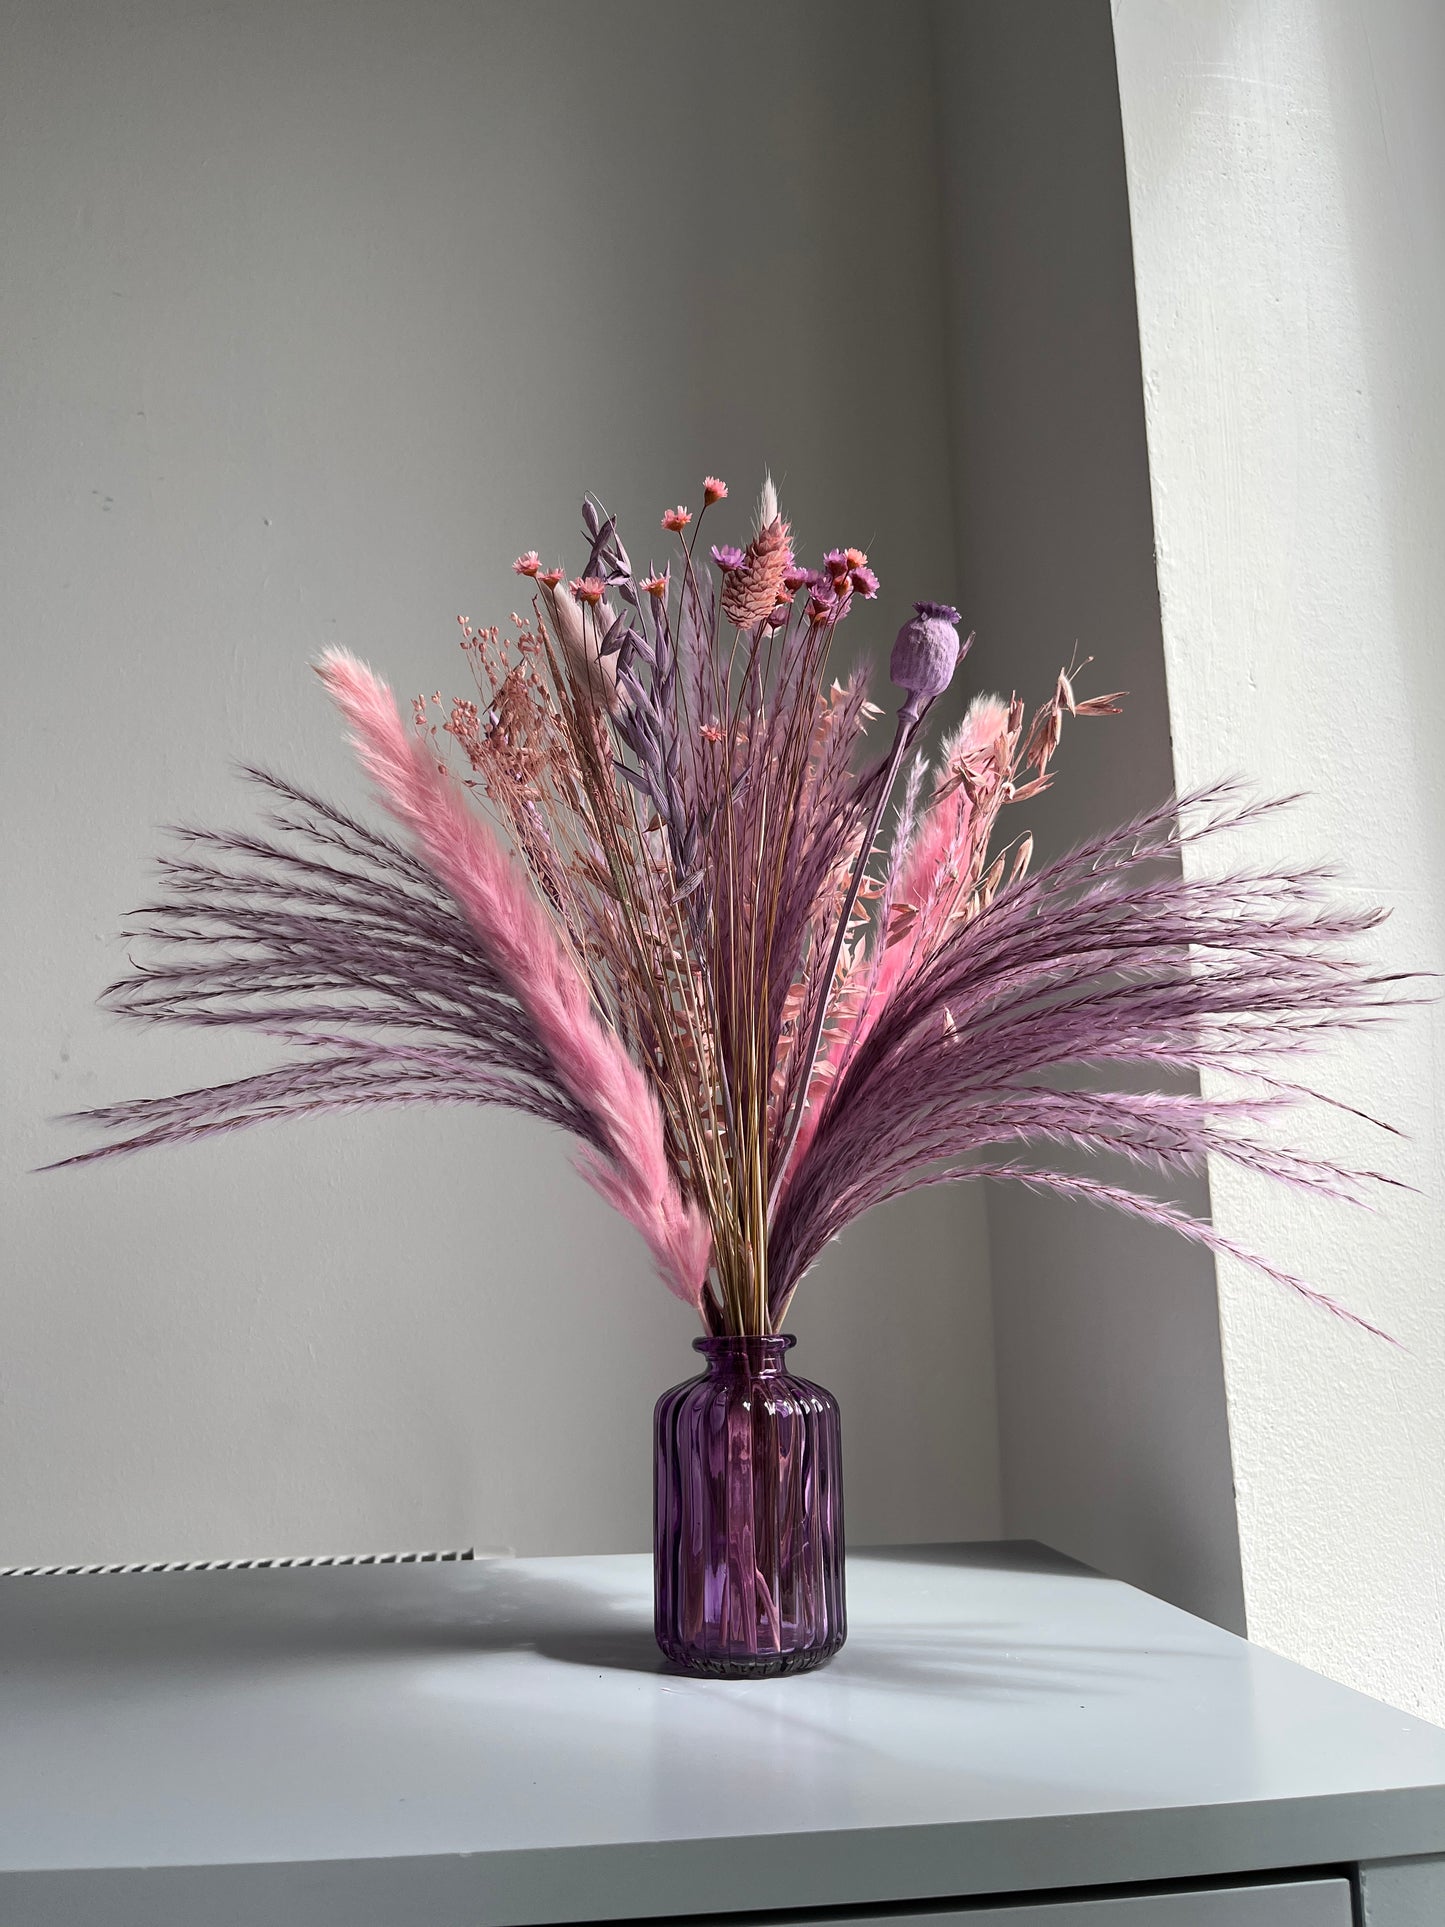 30-35cm Length Bespoke Dried Flowers Created For You